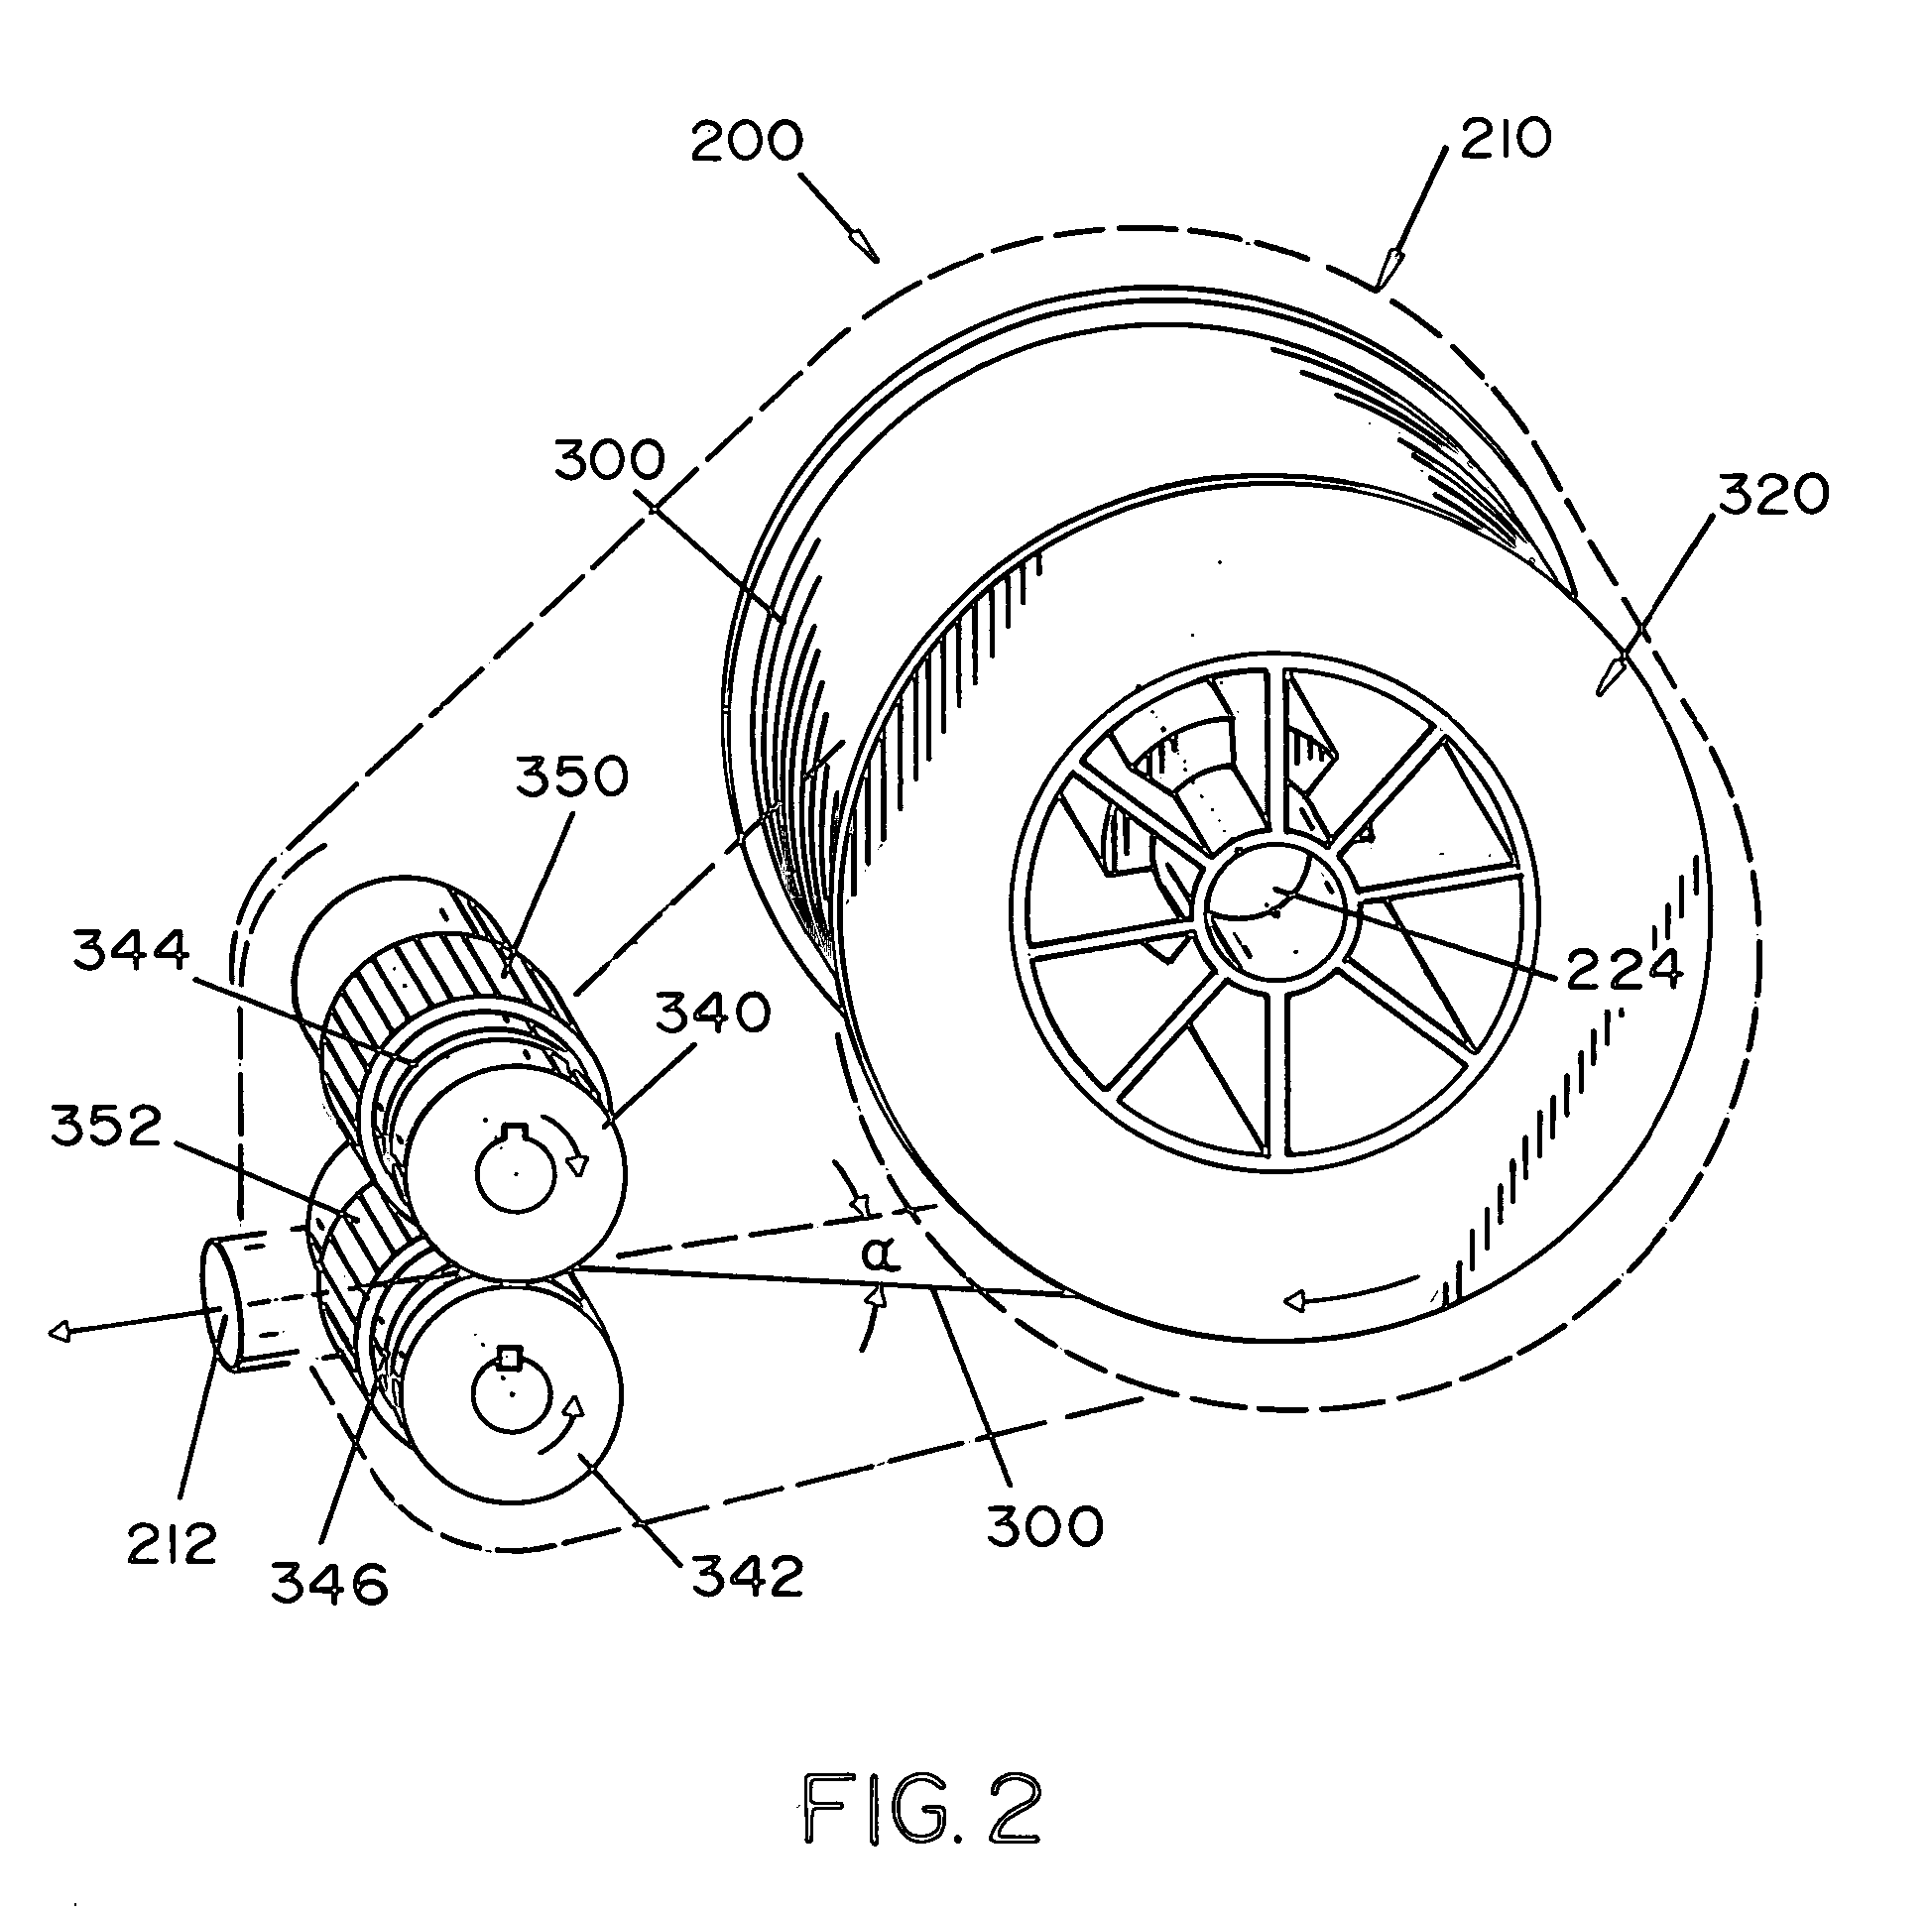 Welding wire spool and drive cartridge